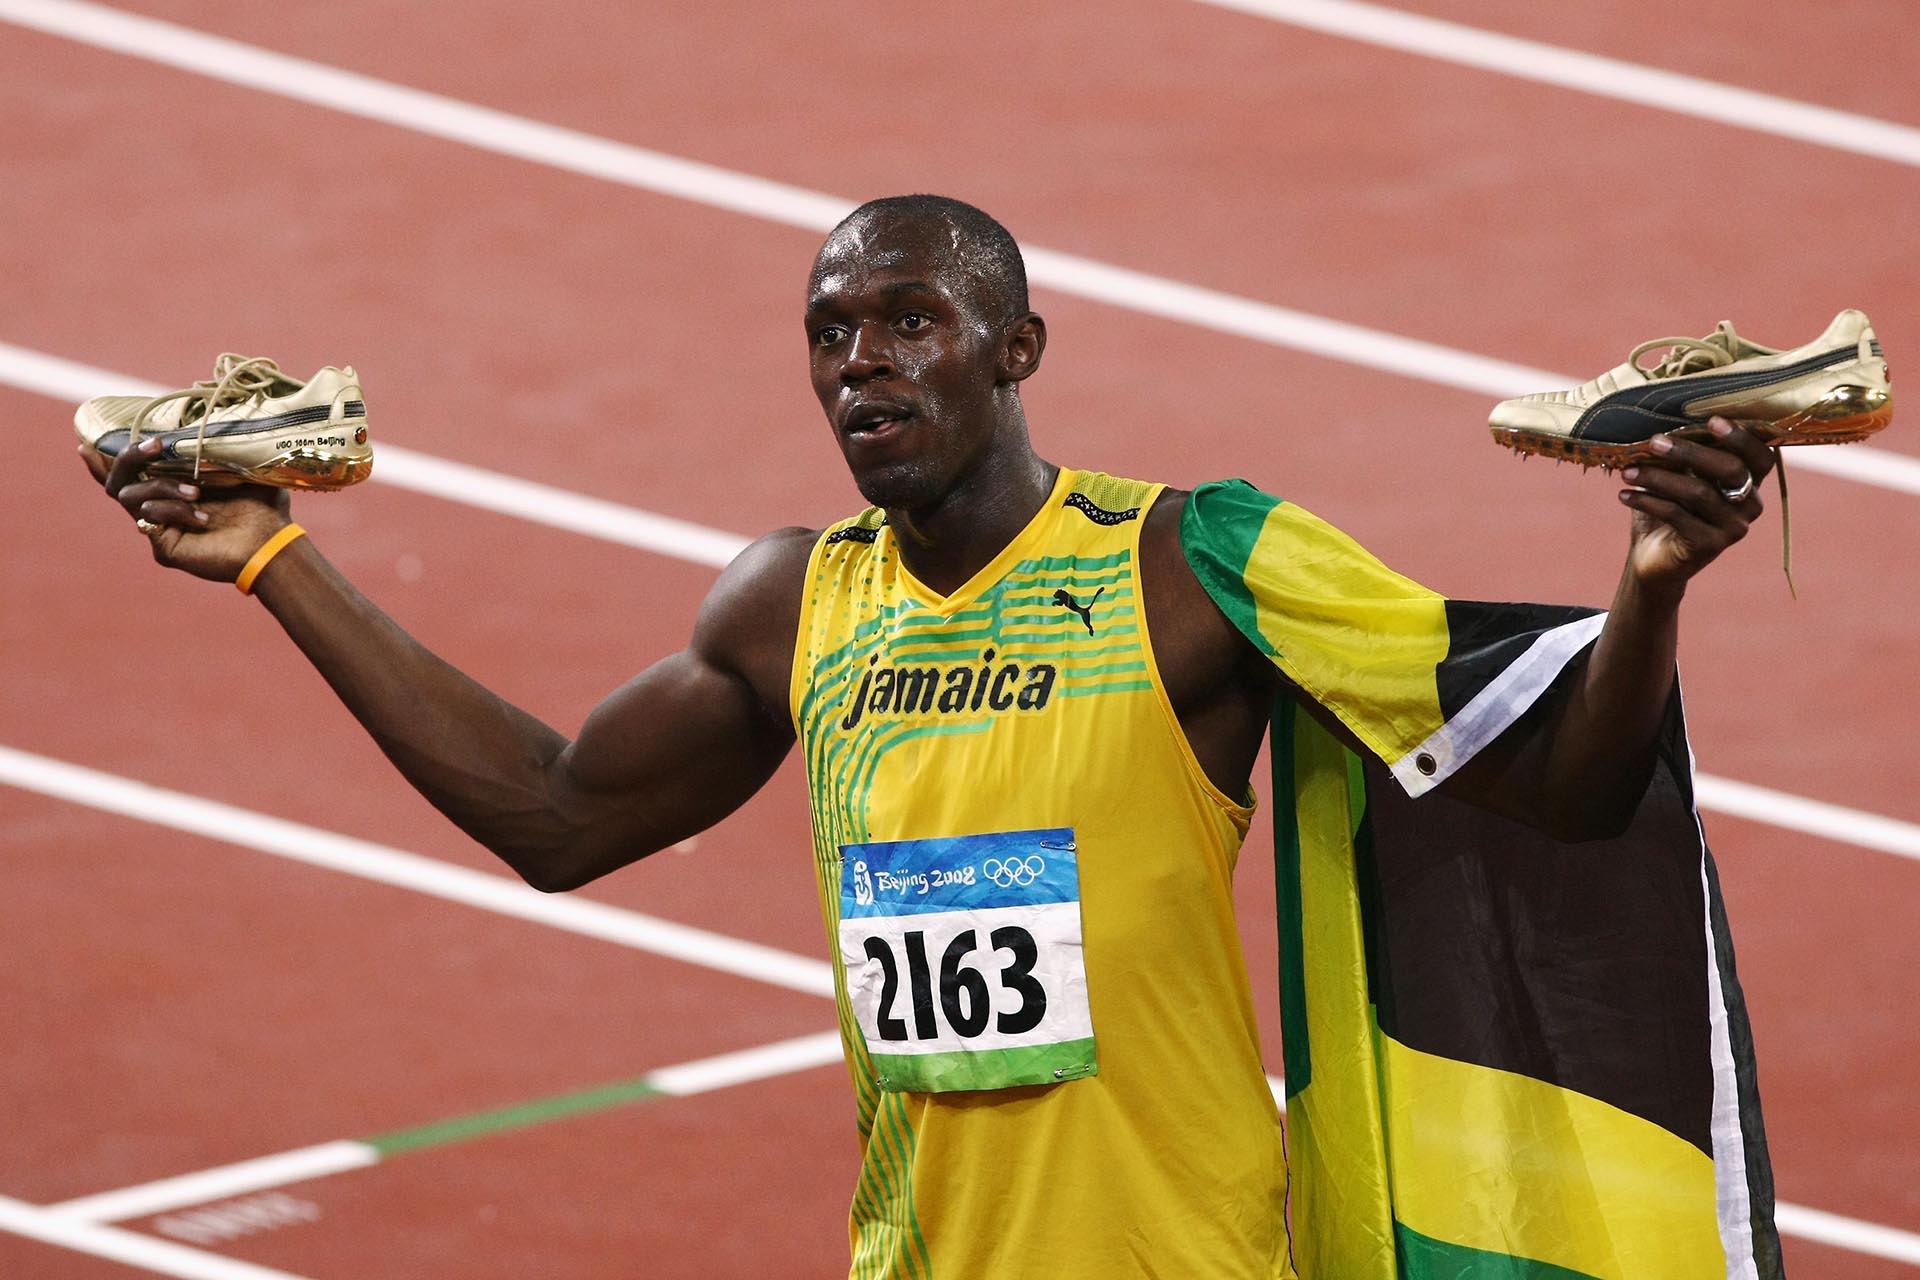 BEIJING - AUGUST 16:  Usain Bolt of Jamaica celebrates winning the Men's 100m Final and the gold medal at the National Stadium on Day 8 of the Beijing 2008 Olympic Games on August 16, 2008 in Beijing, China.  Bolt finished the event in first place with a time of 9.69, a new World Record.  (Photo by Jonathan Ferrey/Getty Images)